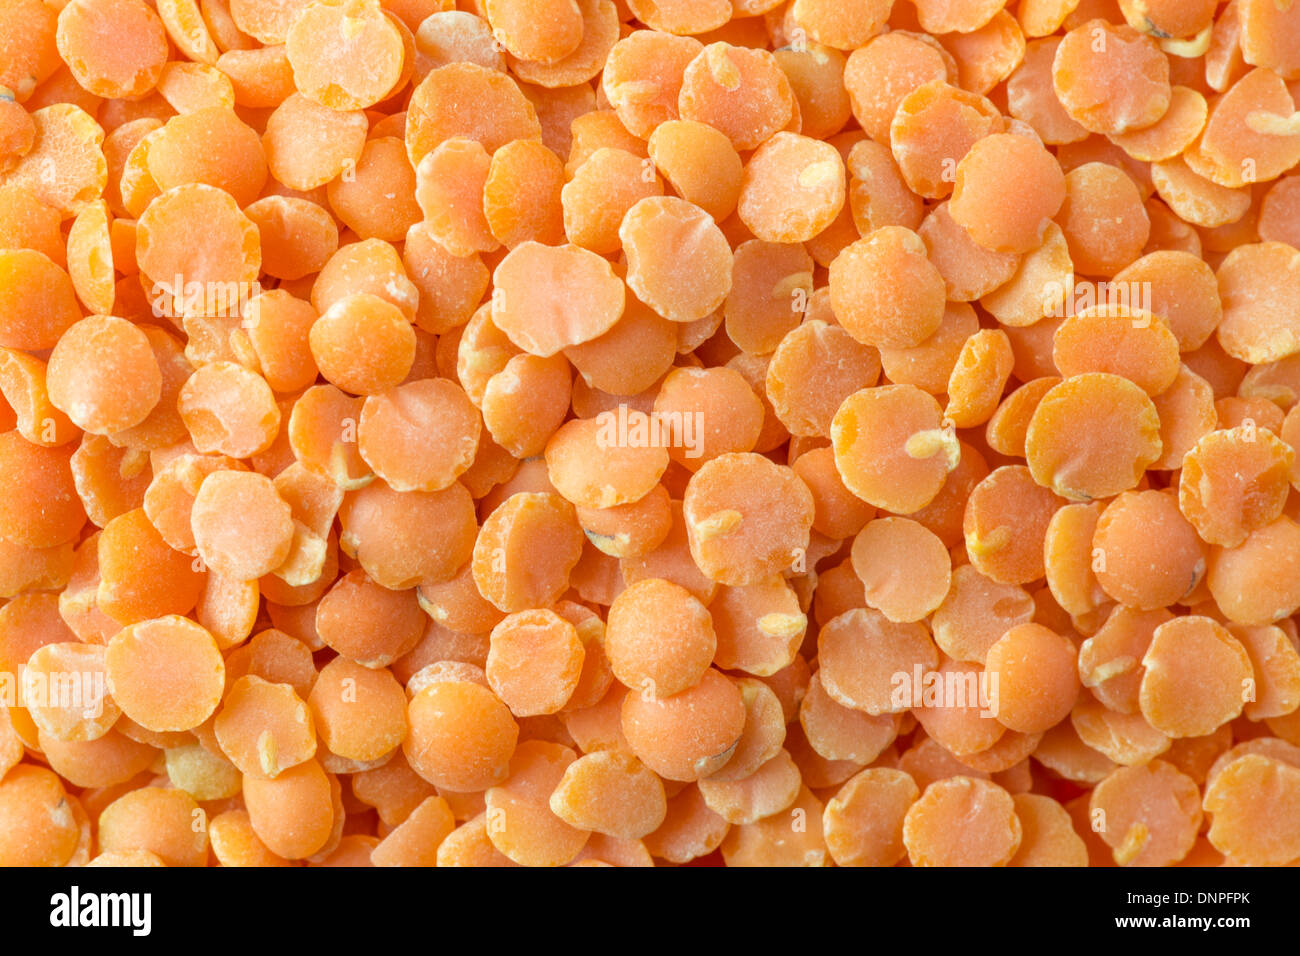 Red Lentils Stock Photo